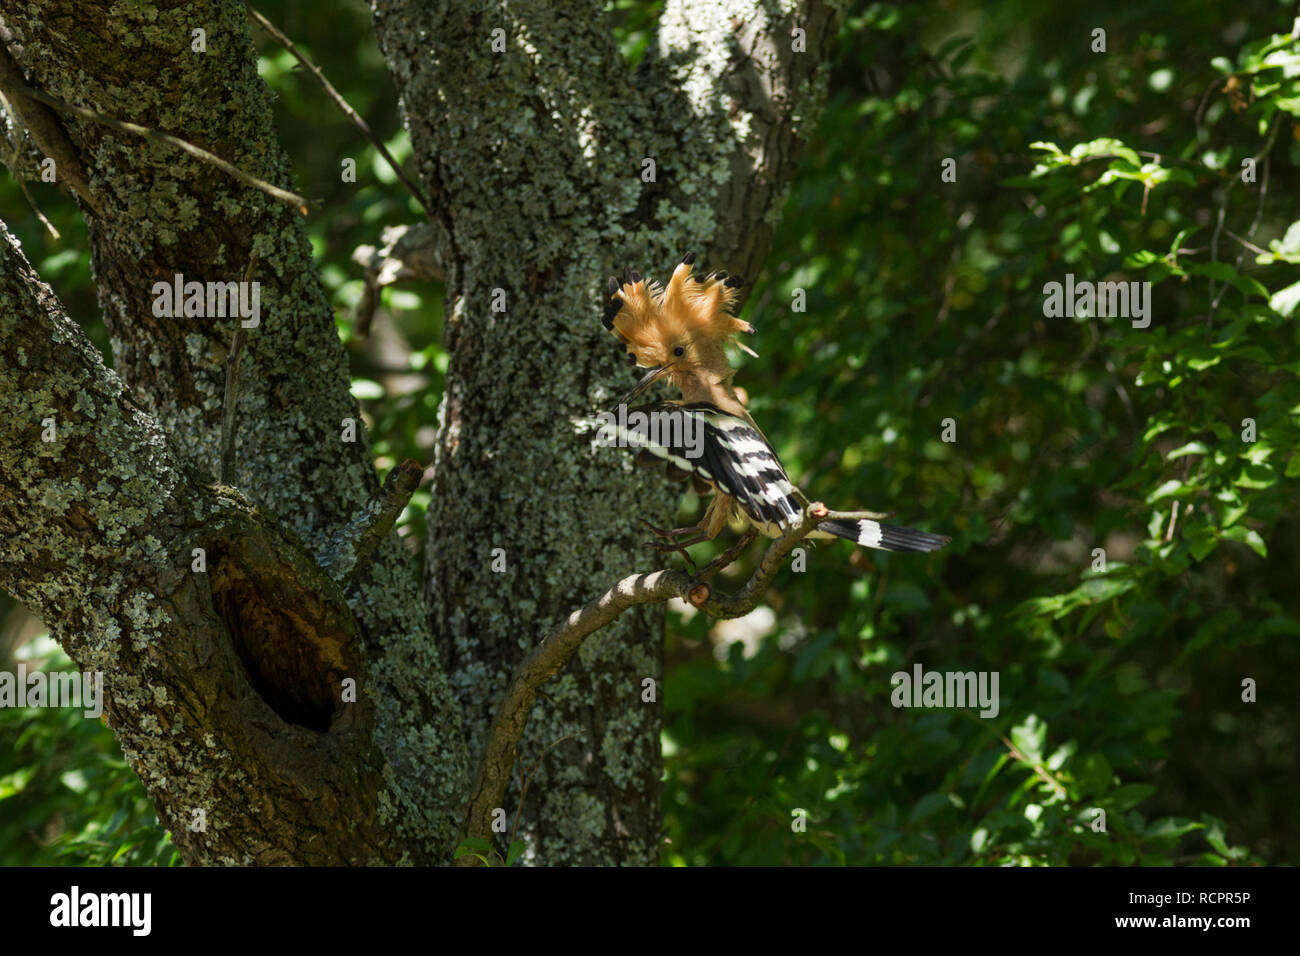 Hoopoe, Latin name Upupa epops, about to land on a branch next to its nest with crest raised in woodland habitat in dappled sunlight Stock Photo